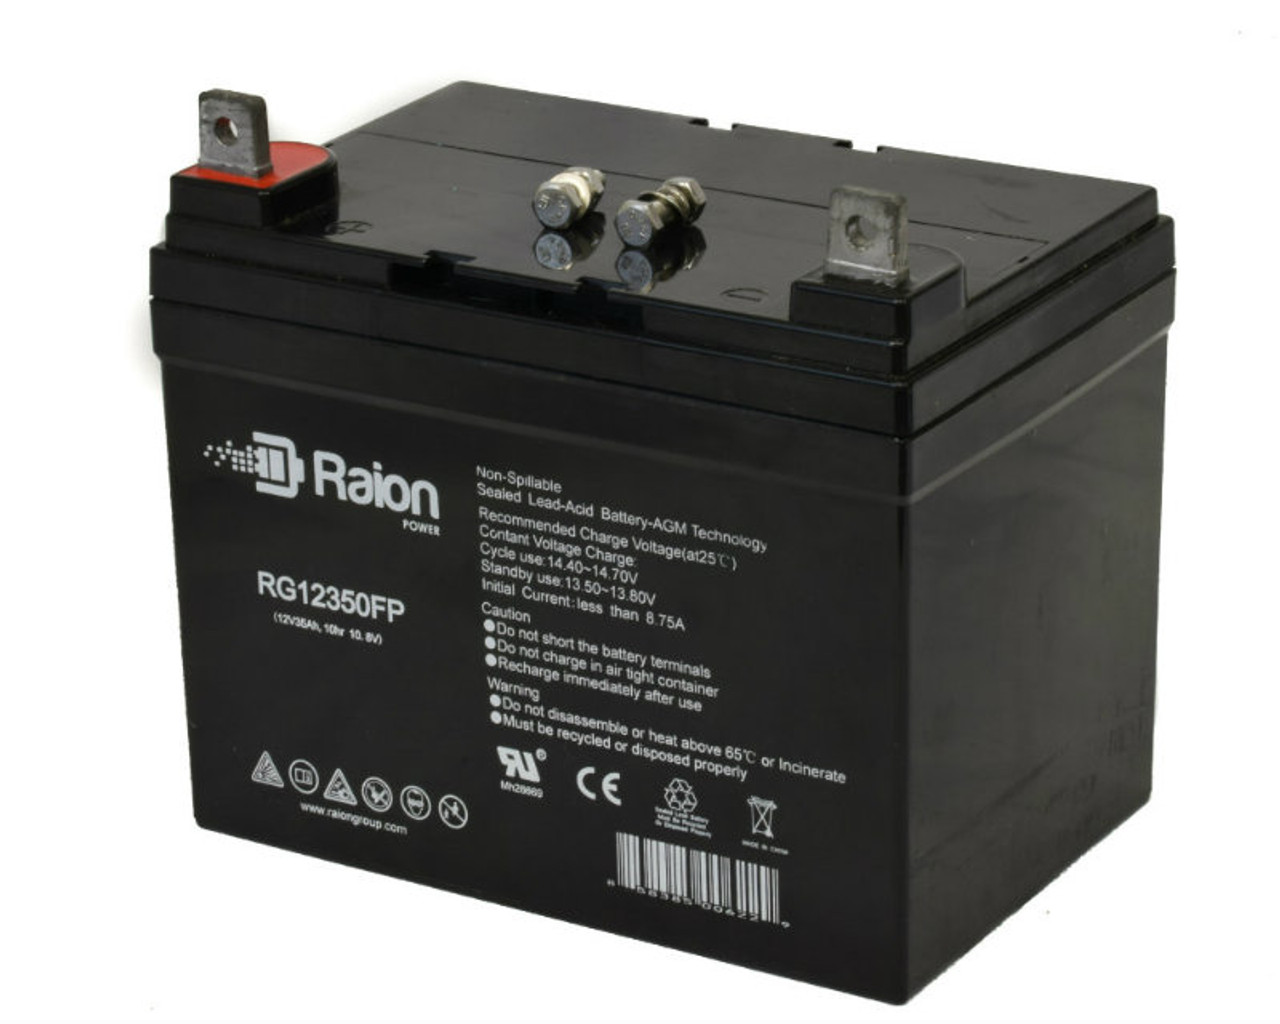 Raion Power Replacement 12V 35Ah RG12350FP Battery for Ariens Gravely EZR 1640